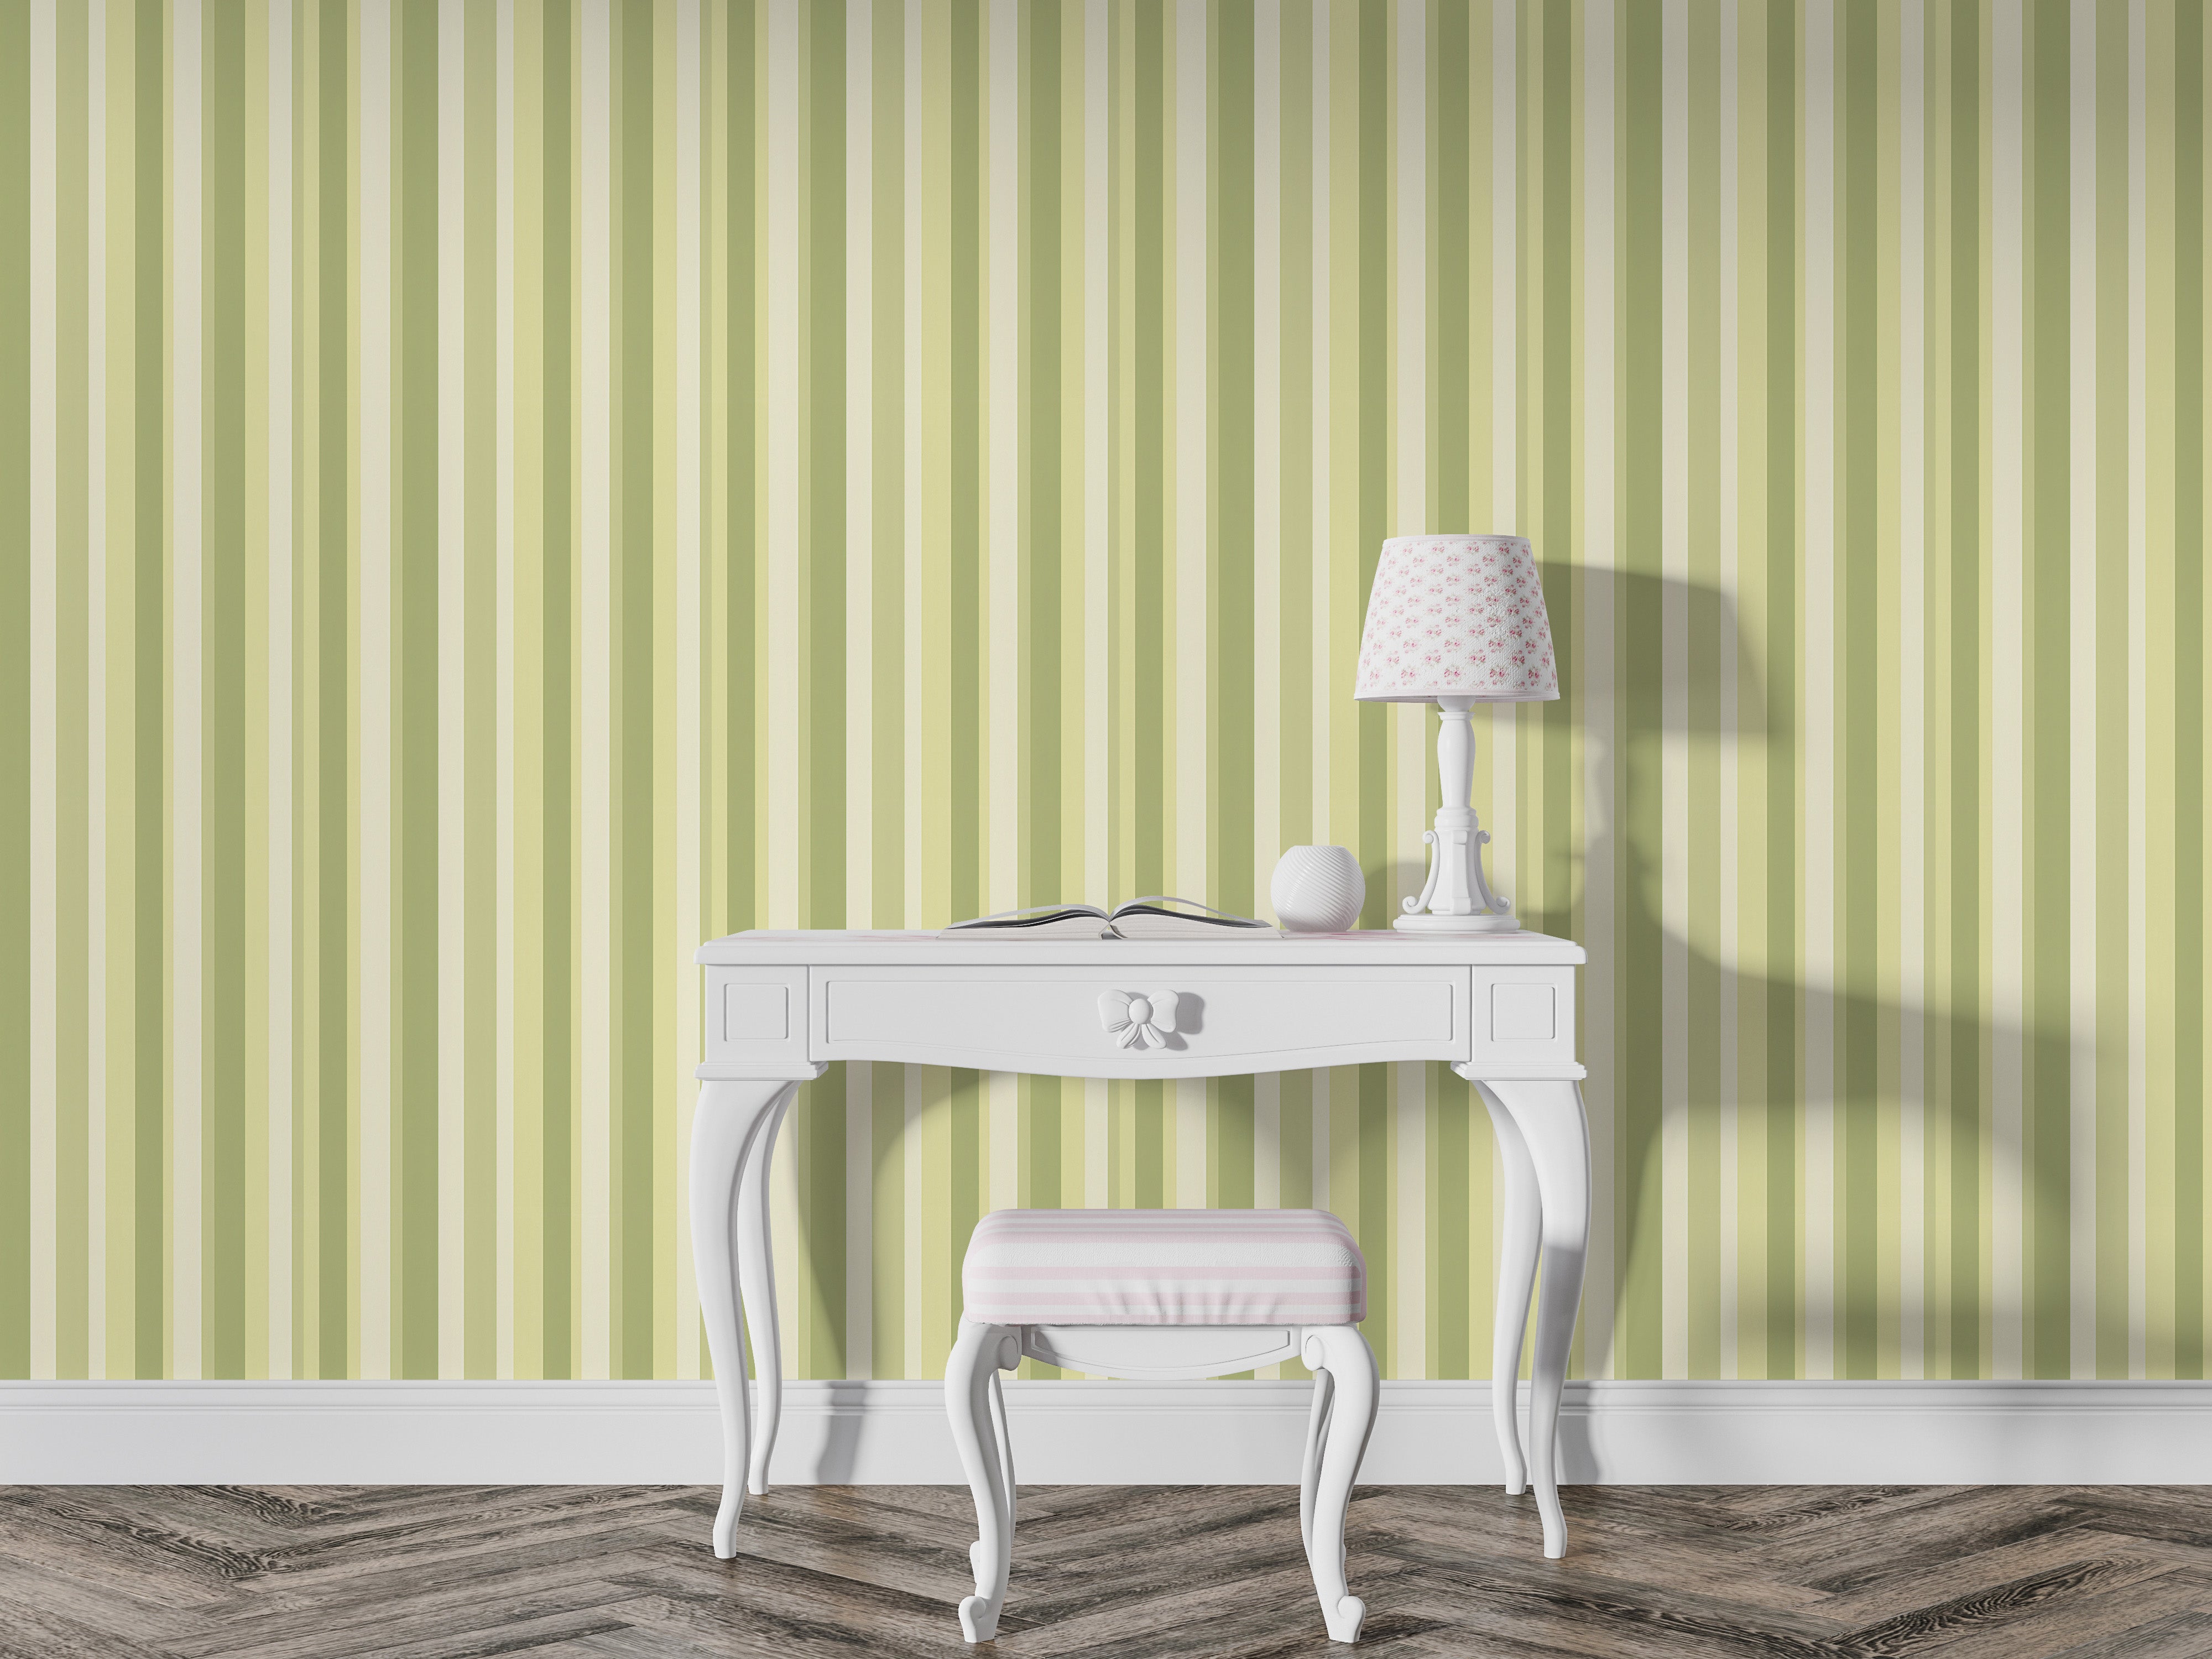 Transform Your Room with Light Green Stripes